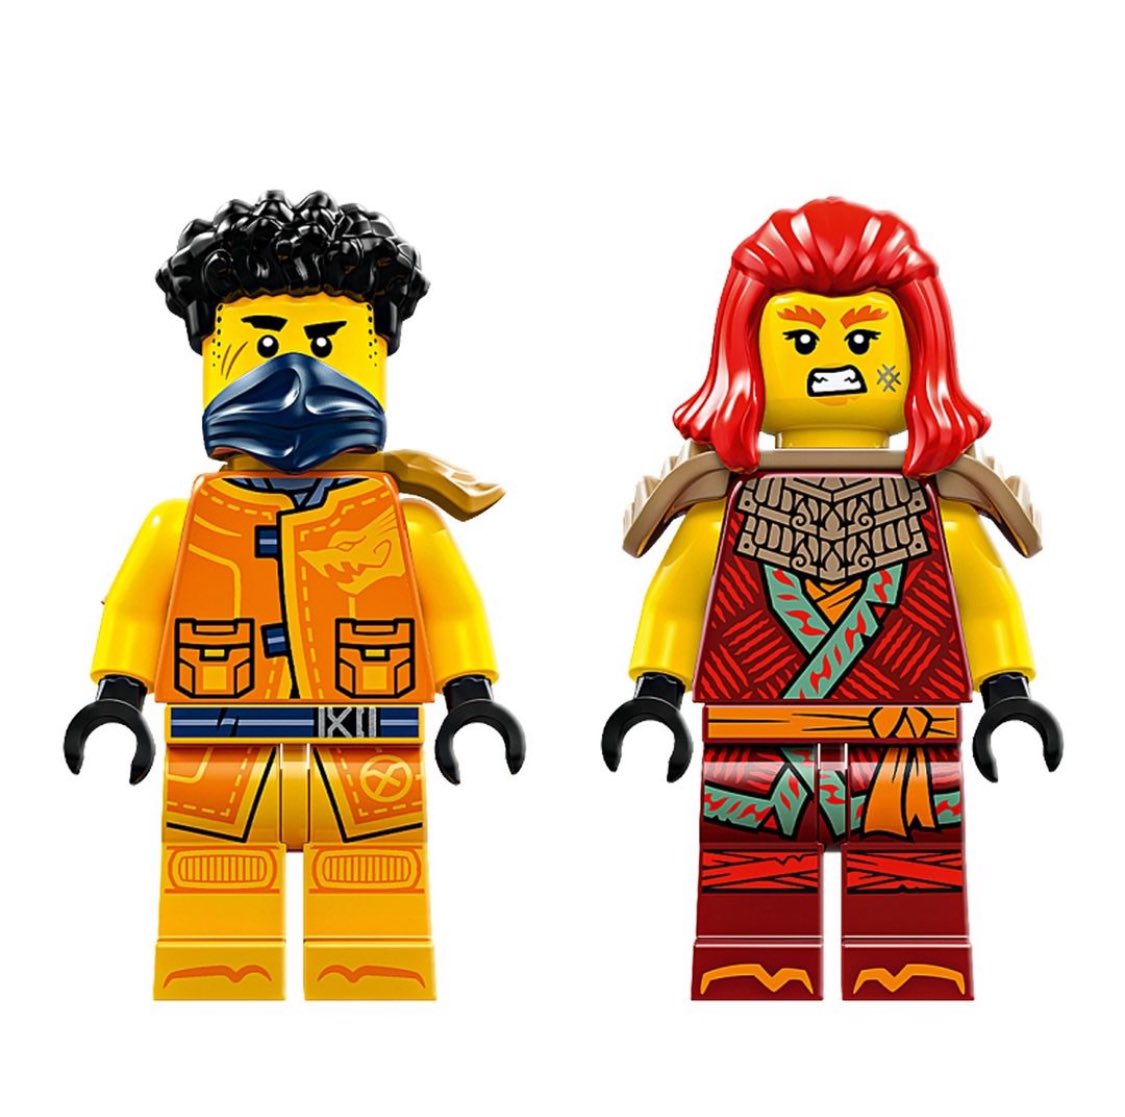 🚨 | Closer look at some upcoming minifigures in the Dragons Rising: season 2, part 2 set wave